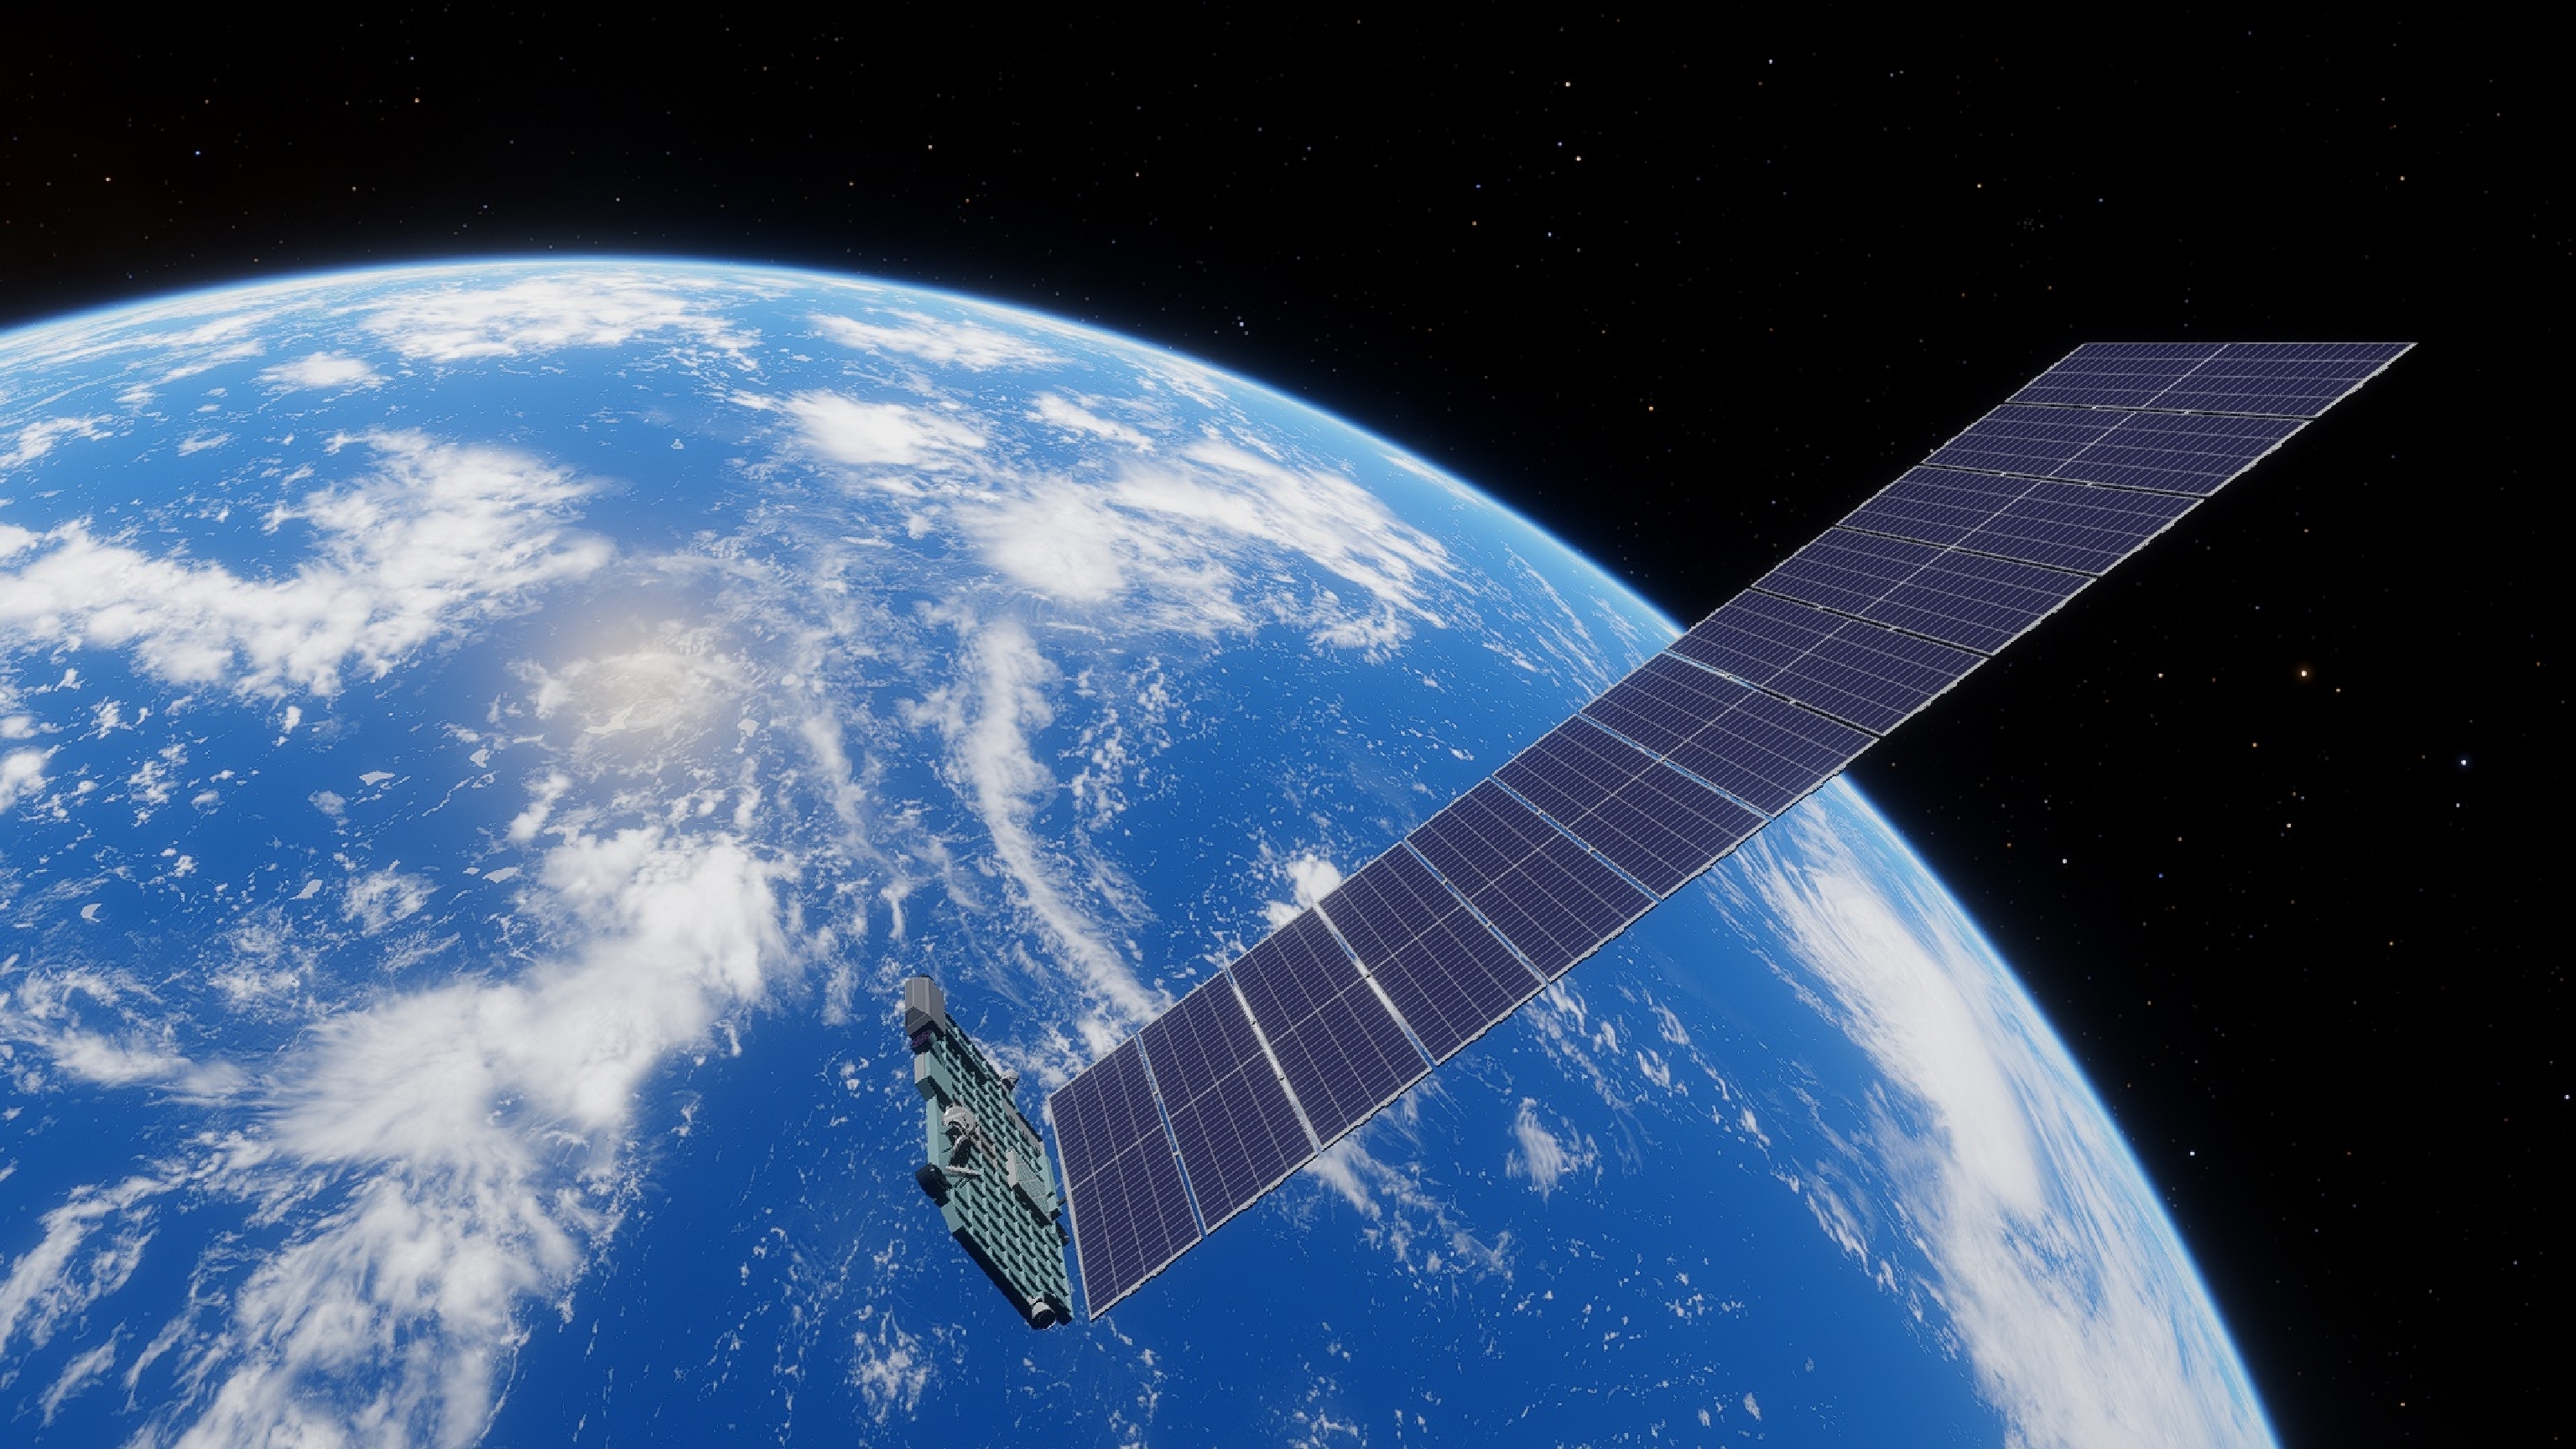 Artist's conception of a Starlink satellite in orbit with the Earth in behind.